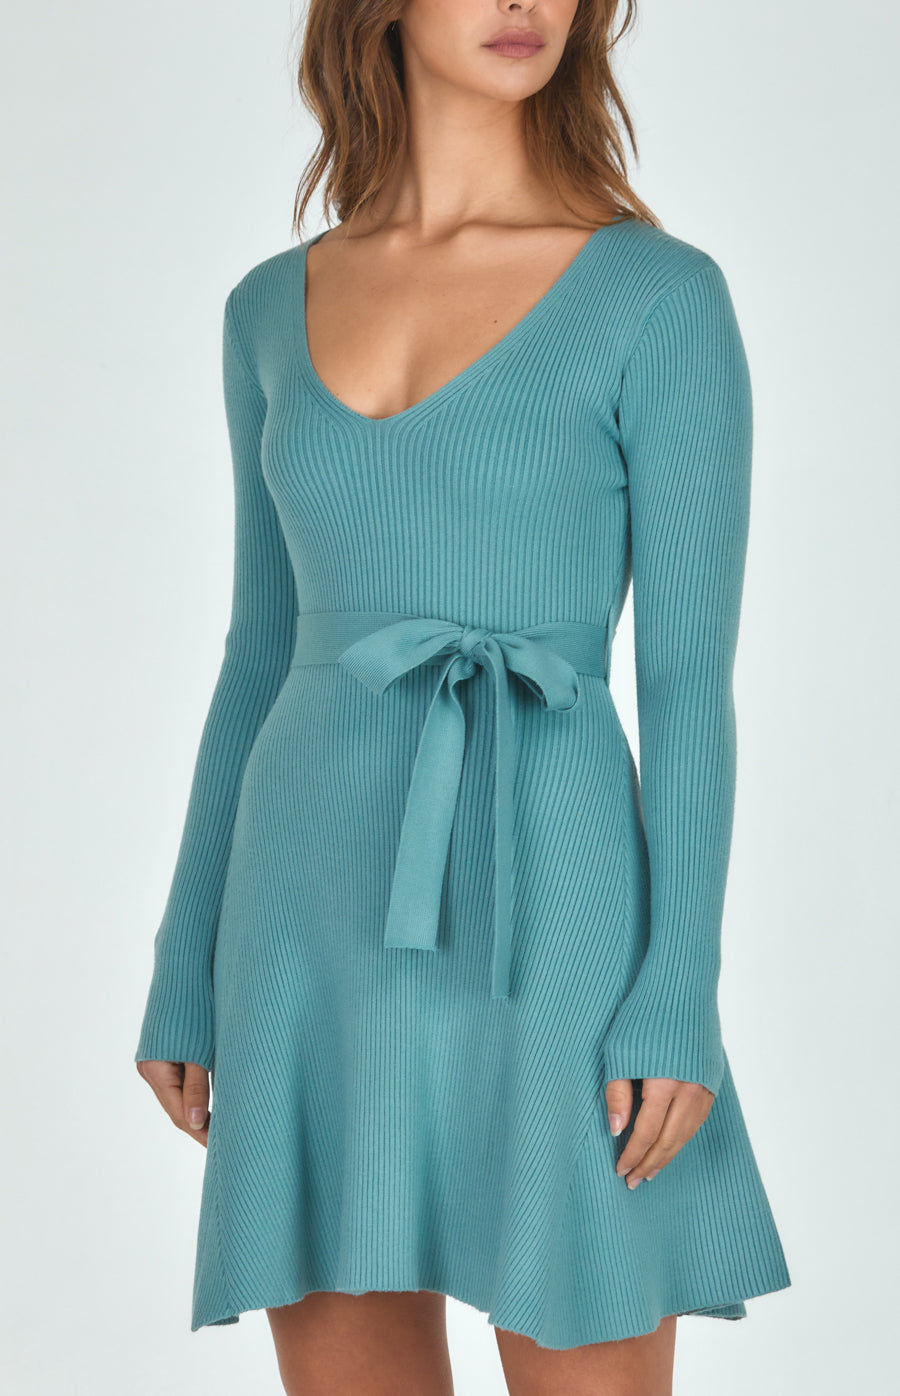 Moscow Knit Dress - Blue